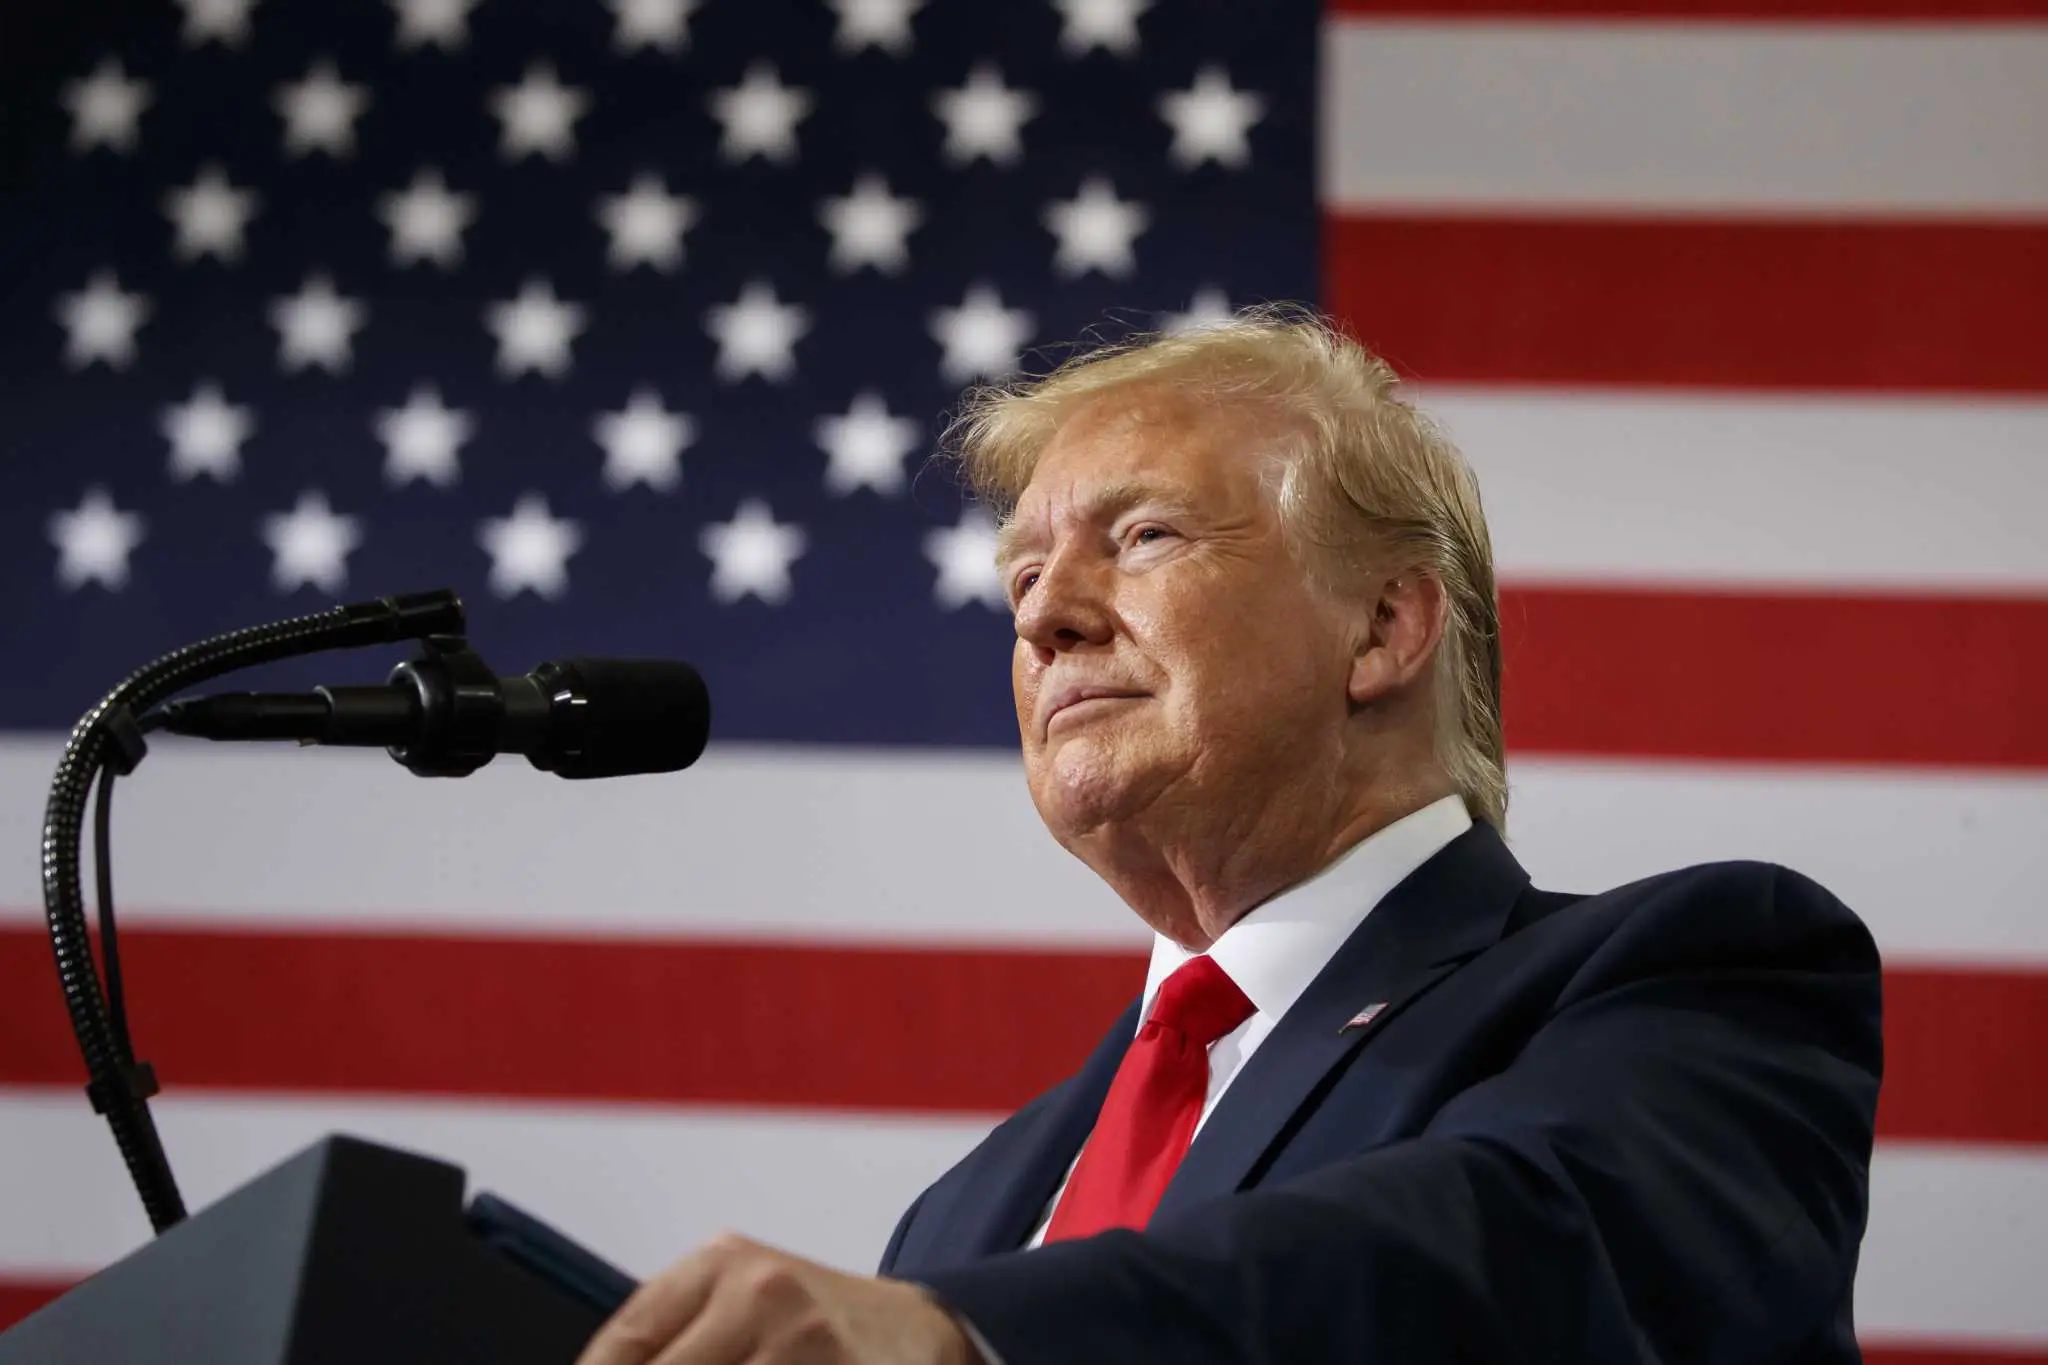 History suggests Trump will be tough to beat in 2020